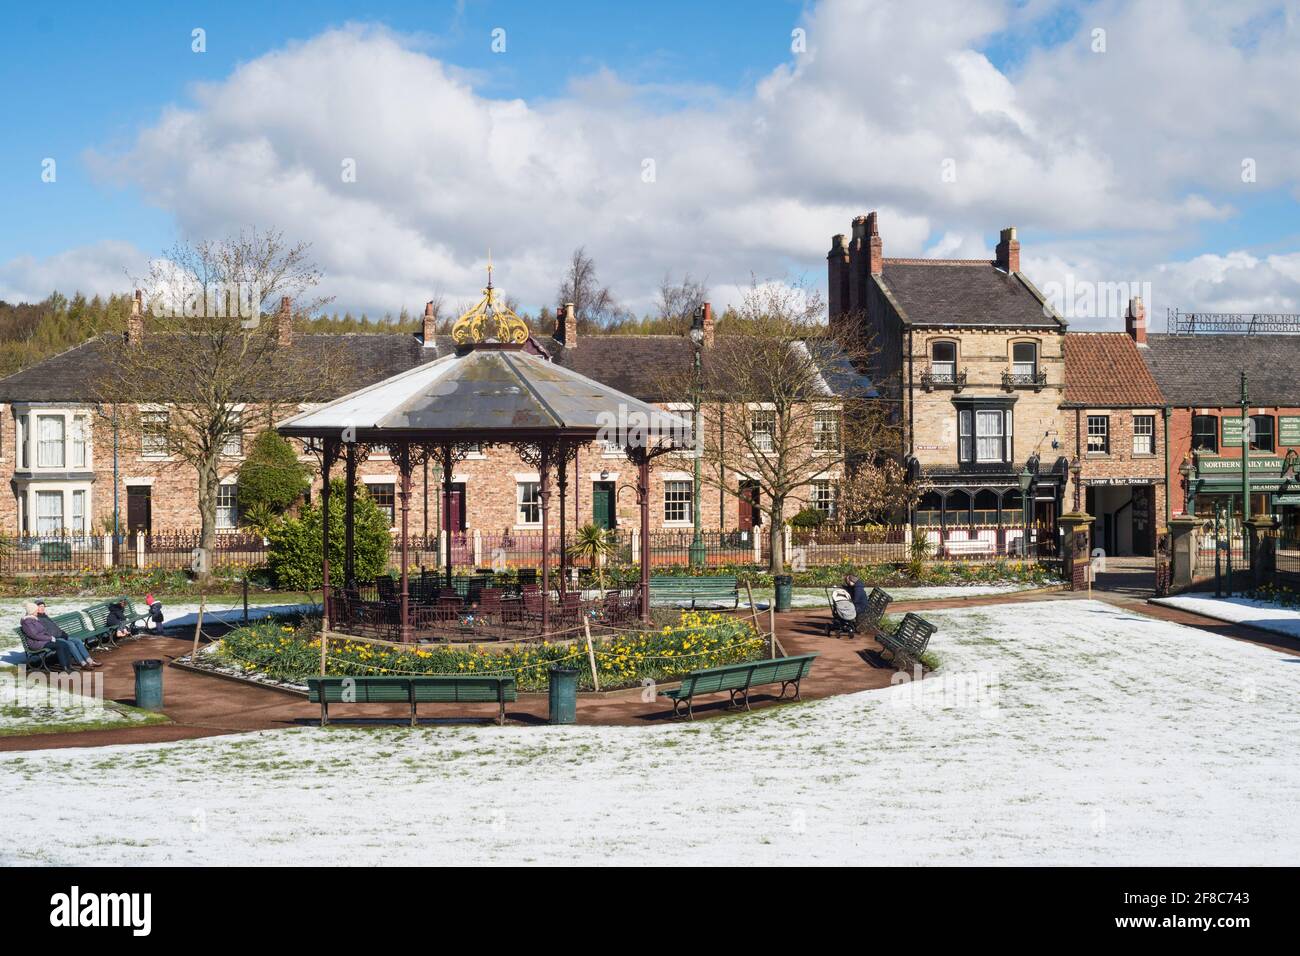 A light covering of snow at the bandstand and 1900s town within Beamish Museum, Co. Durham, England Stock Photo